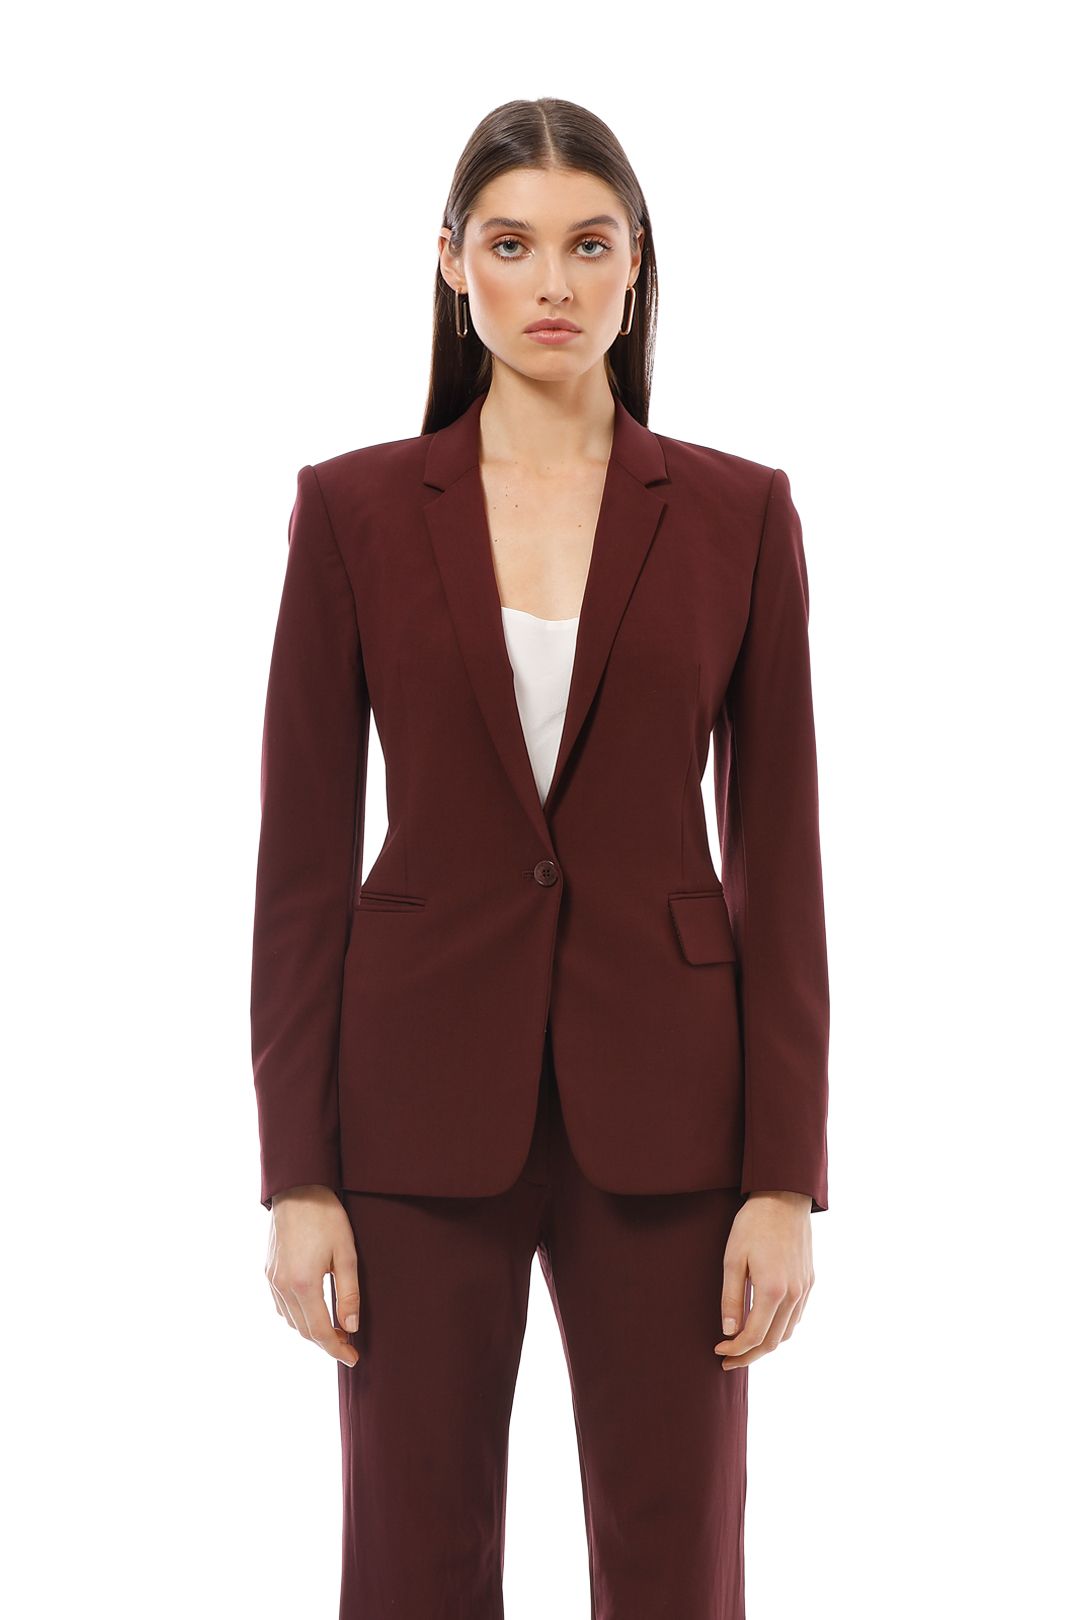 Theory - Crepe Jacket - Burgundy - Front Crop